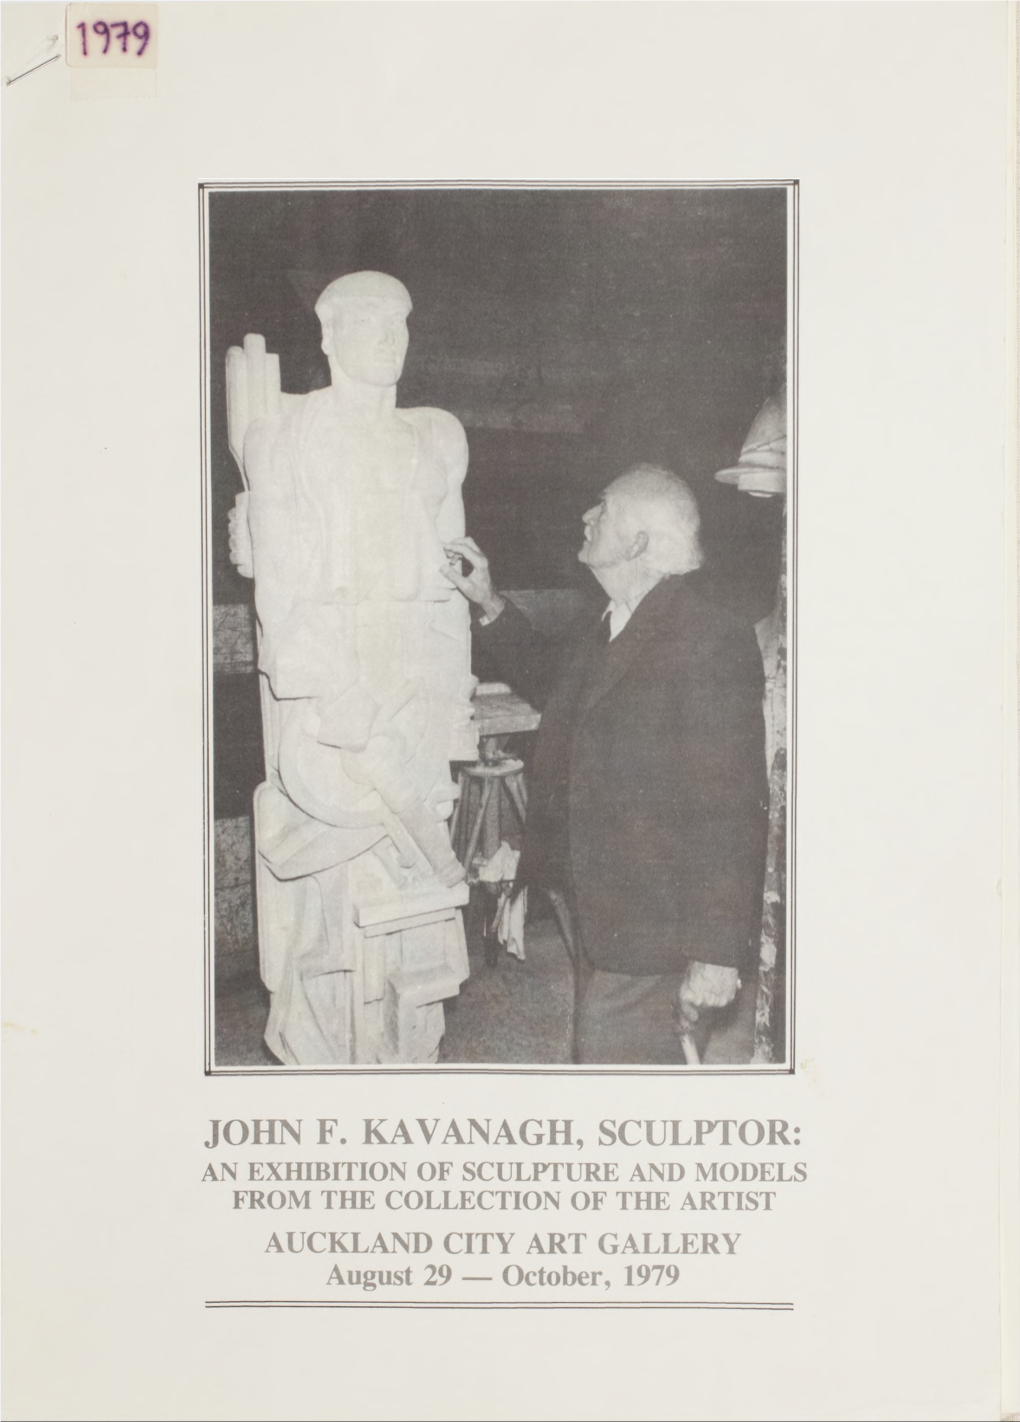 JOHN F. KAVANAGH, SCULPTOR: an EXHIBITION of SCULPTURE and MODELS from the COLLECTION of the ARTIST AUCKLAND CITY ART GALLERY August 29 — October, 1979 PREFACE